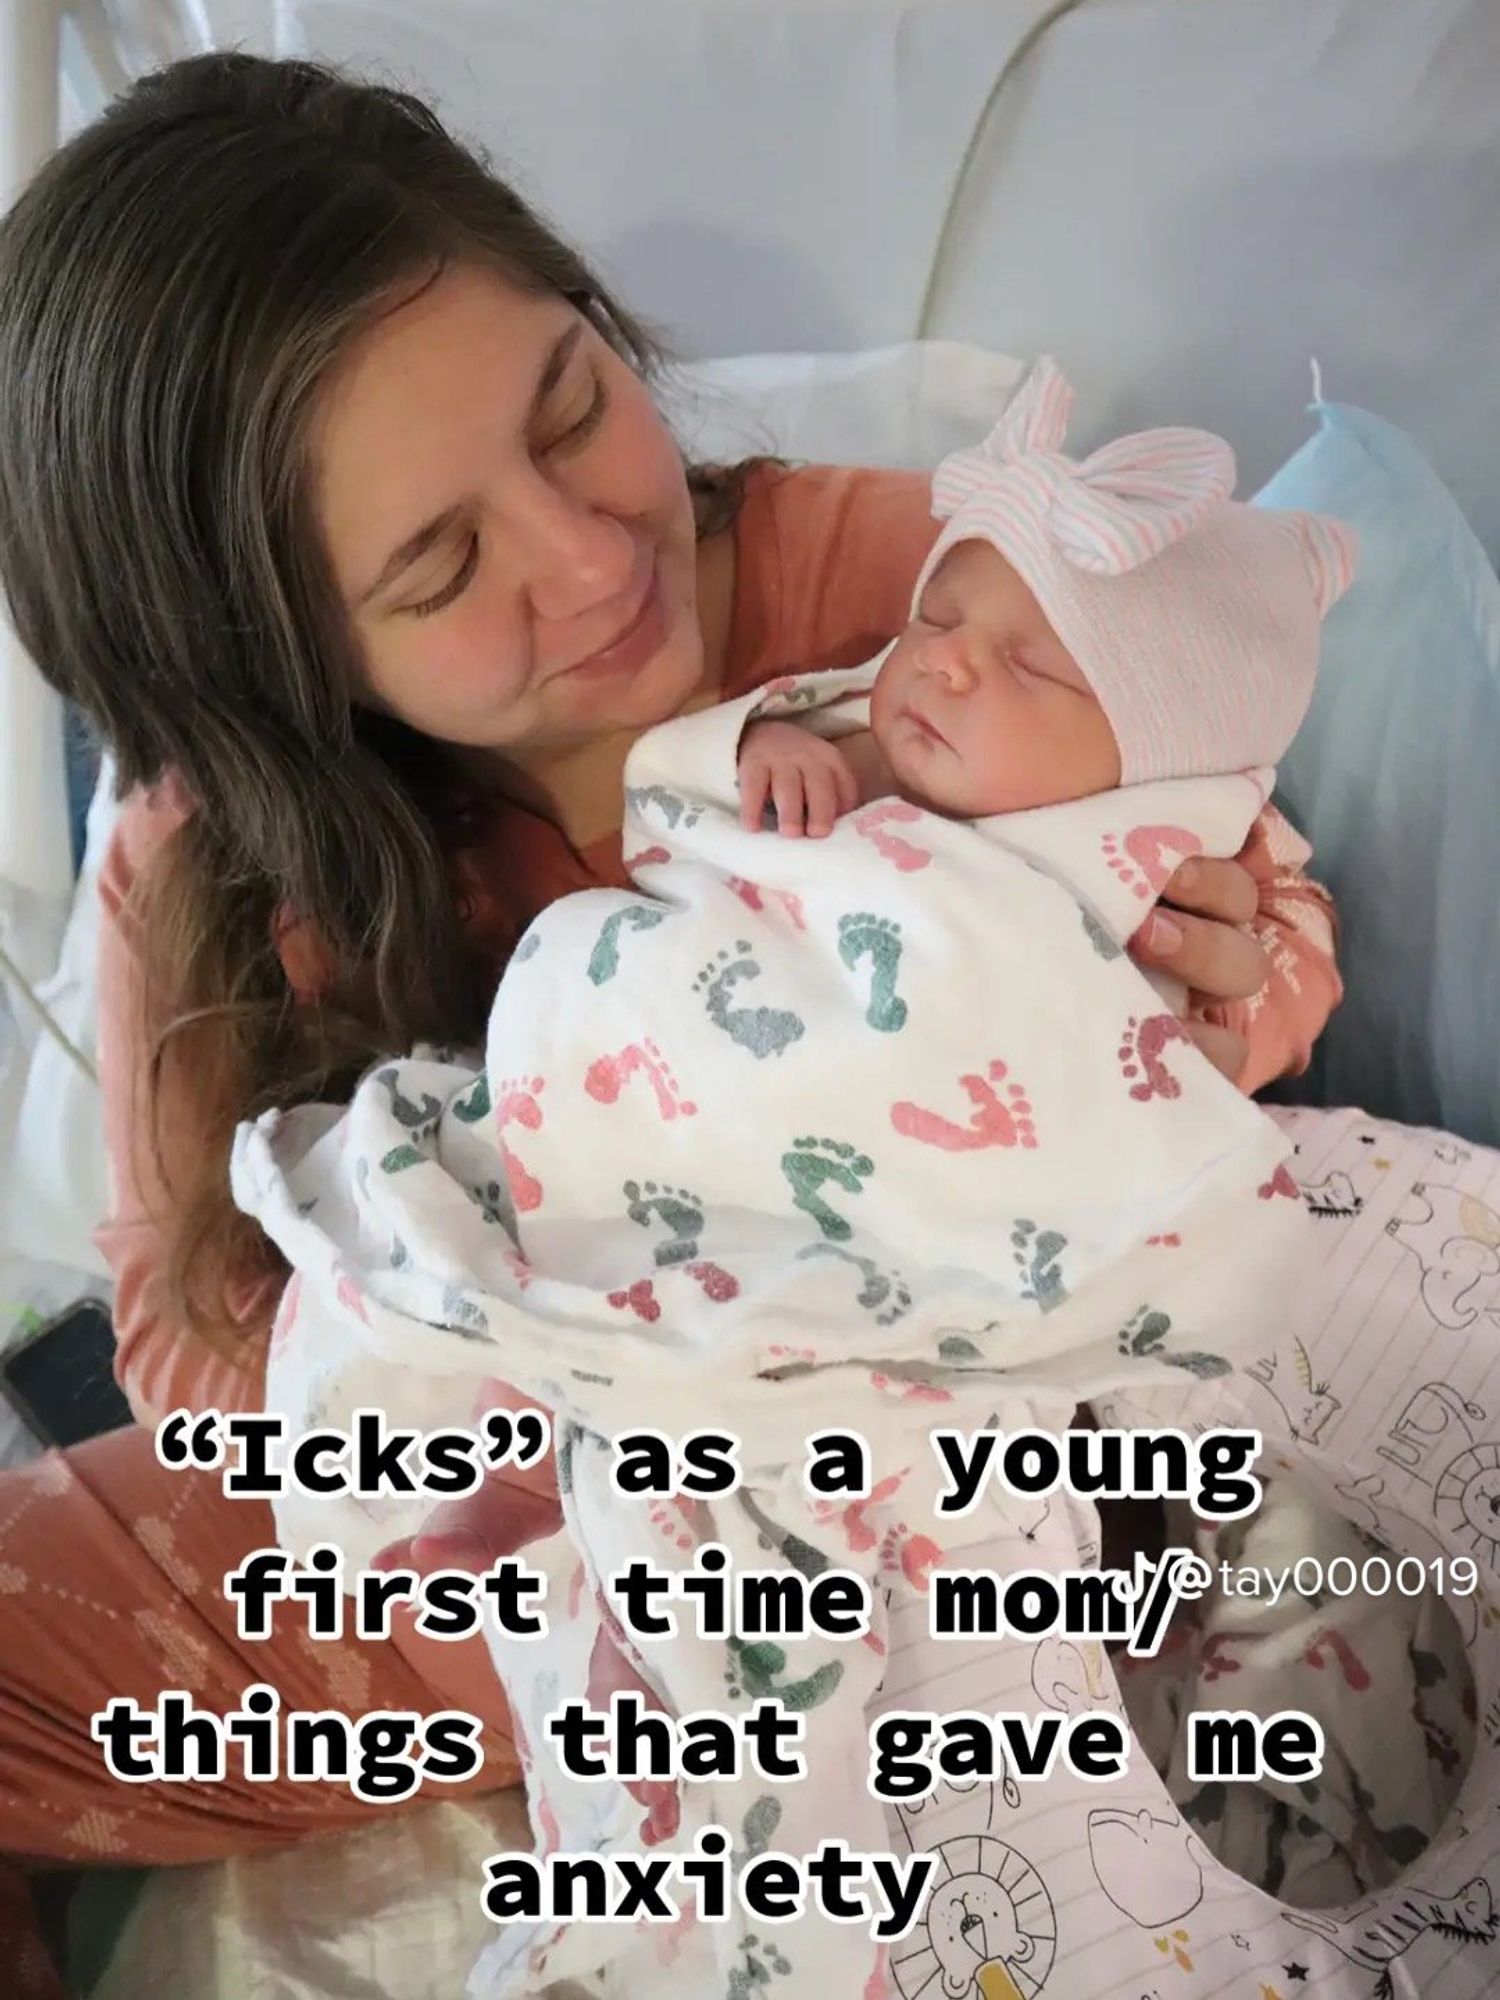 Mom holding baby with text overlay